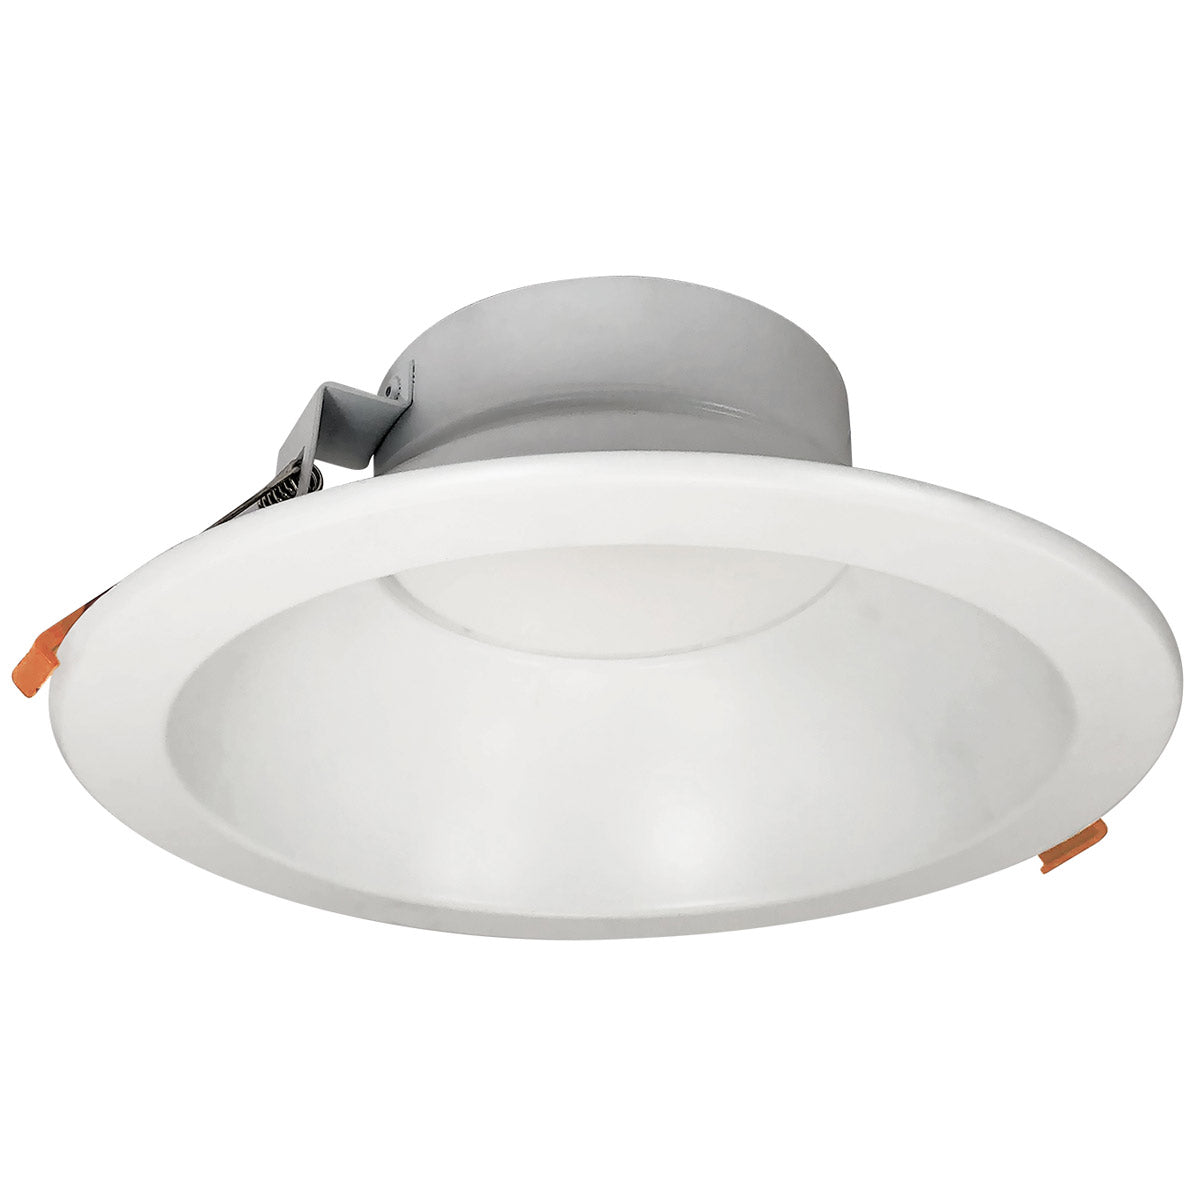 LED Downlight with Selectable CCT - Theia Series by Nora